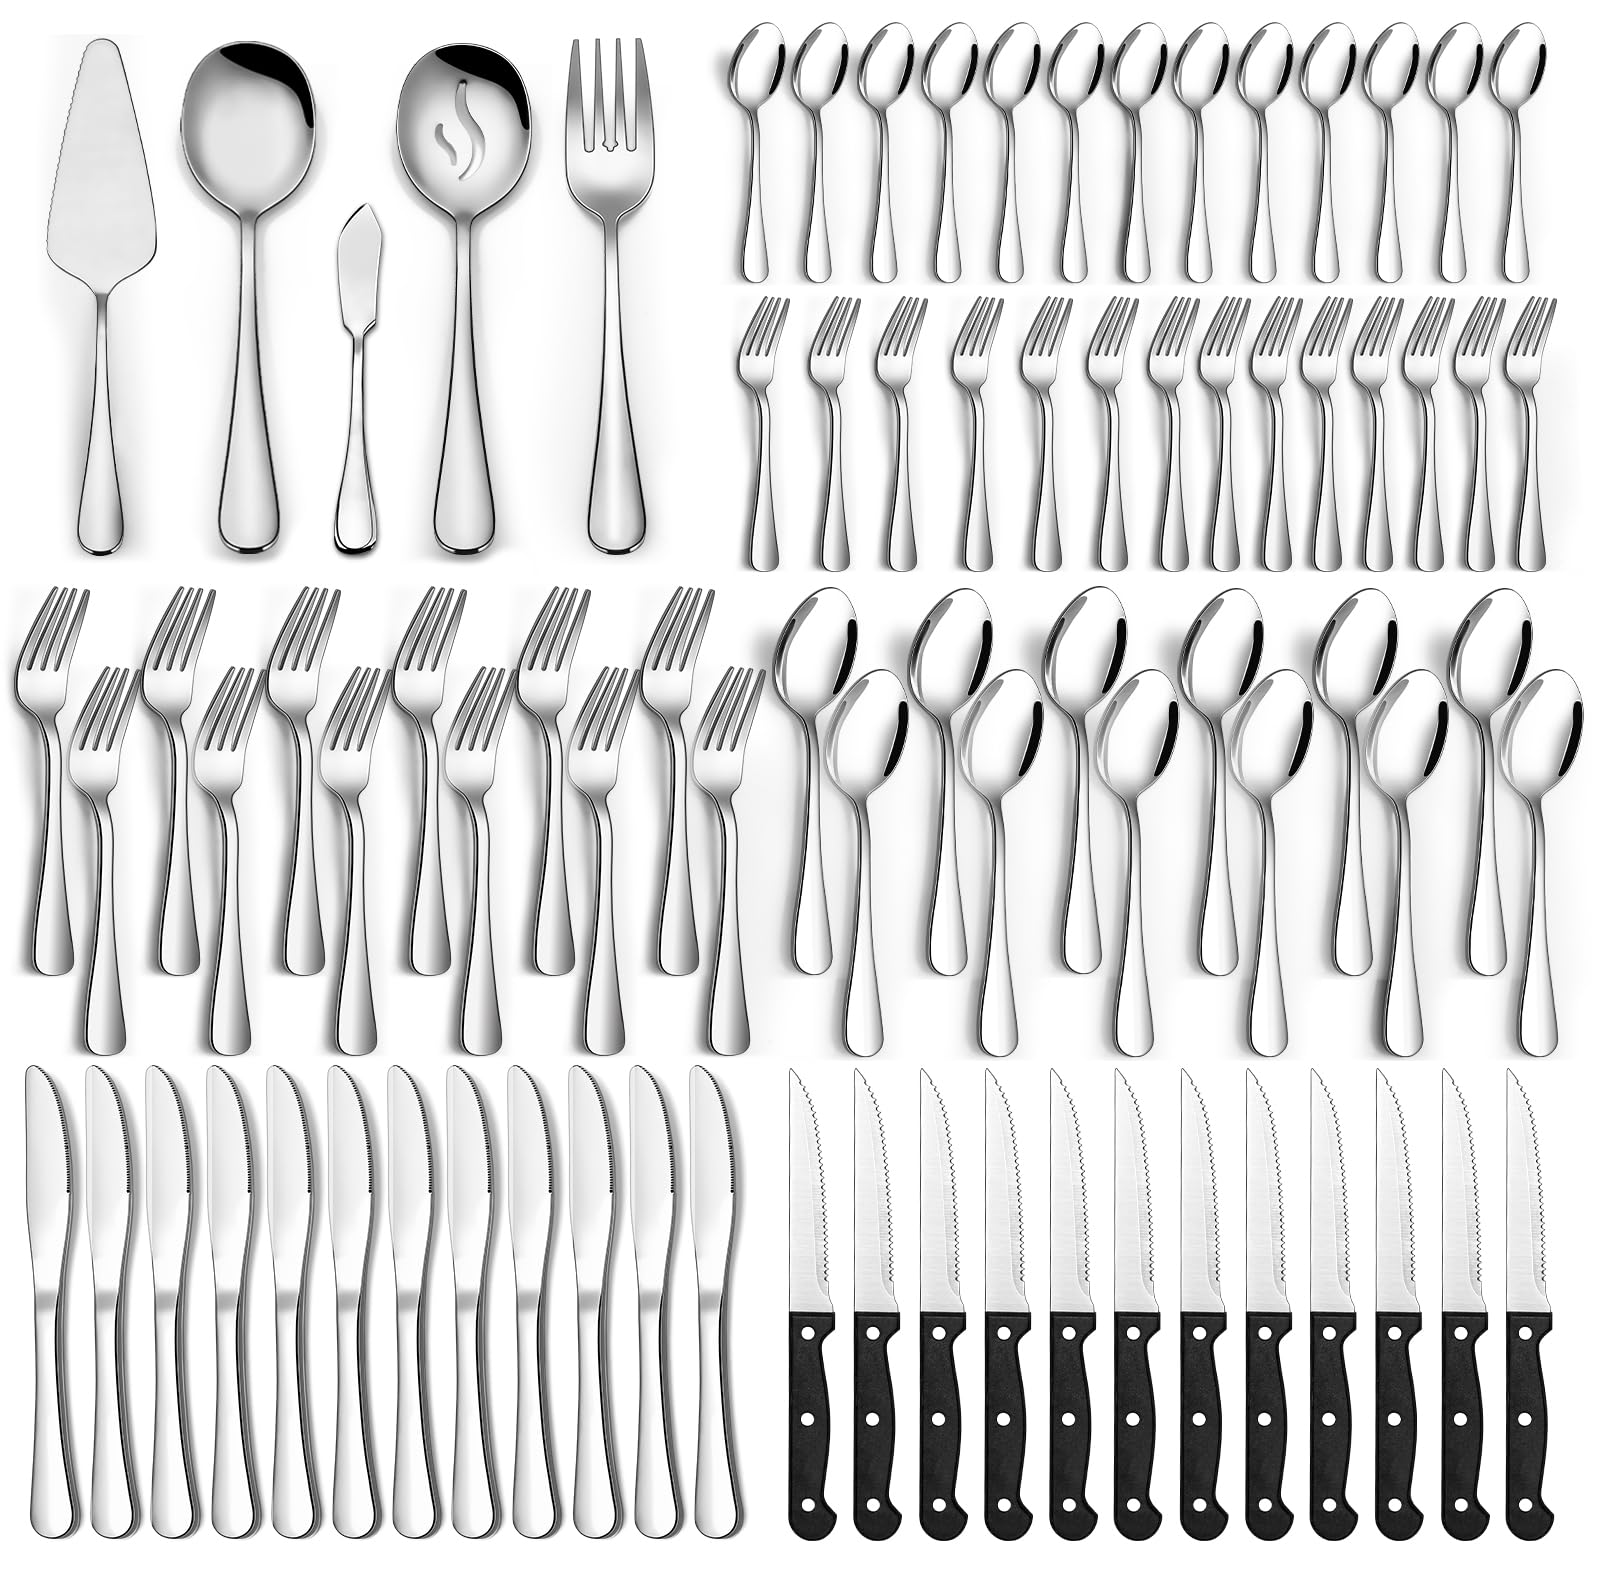 53-Piece Silverware Set with Steak Knives, Flatware Set for 8, Food-Grade Stainless Steel Tableware Cutlery Set with Serving Utensils, Utensil Sets for Home Restaurant, Mirror Finish, Dishwasher Safe